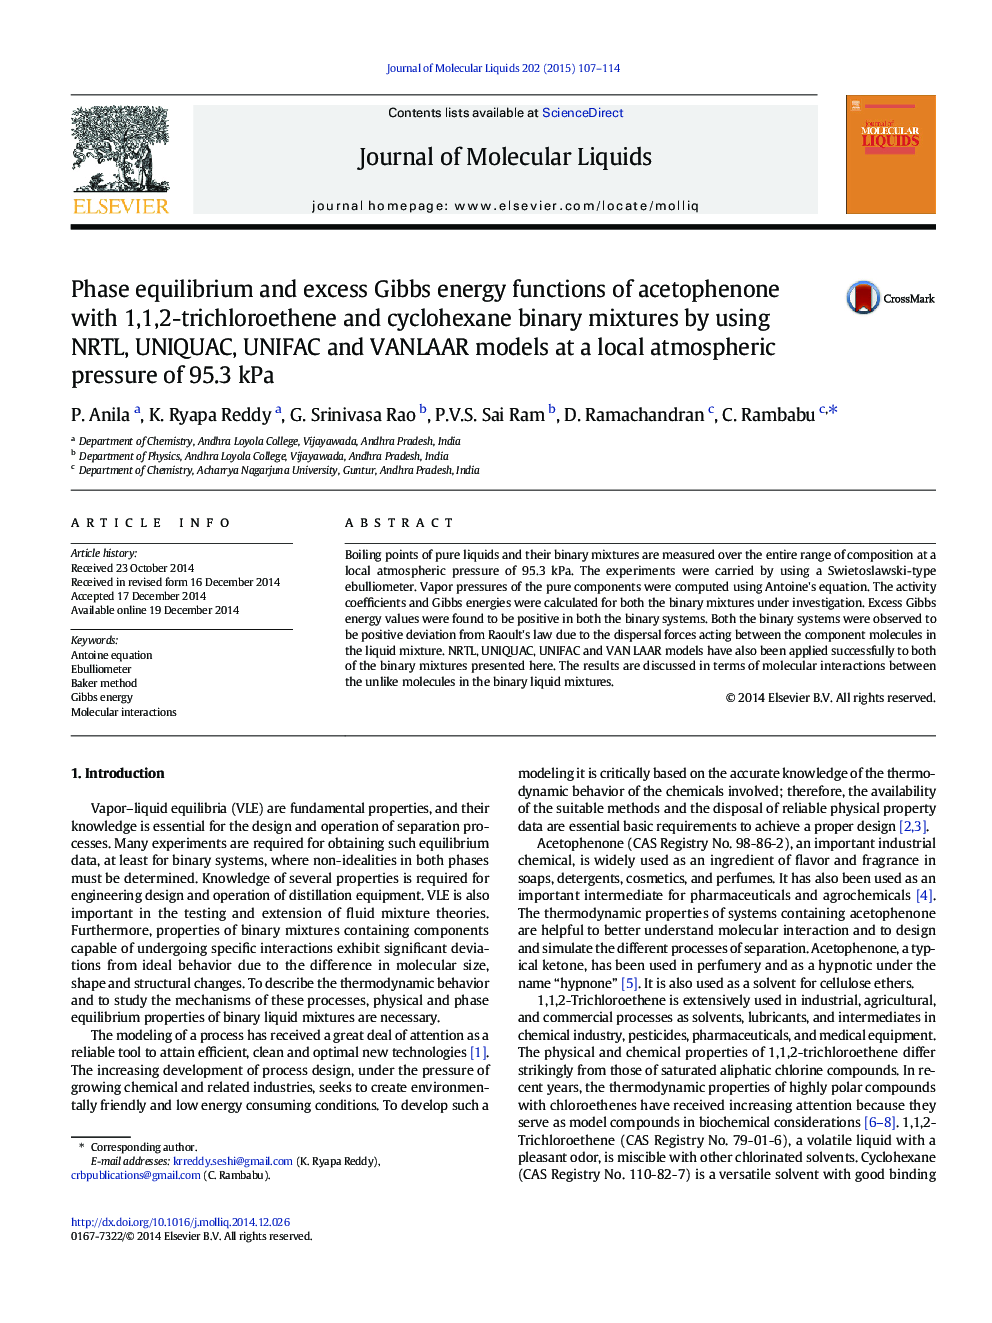 Phase equilibrium and excess Gibbs energy functions of acetophenone with 1,1,2-trichloroethene and cyclohexane binary mixtures by using NRTL, UNIQUAC, UNIFAC and VANLAAR models at a local atmospheric pressure of 95.3Â kPa